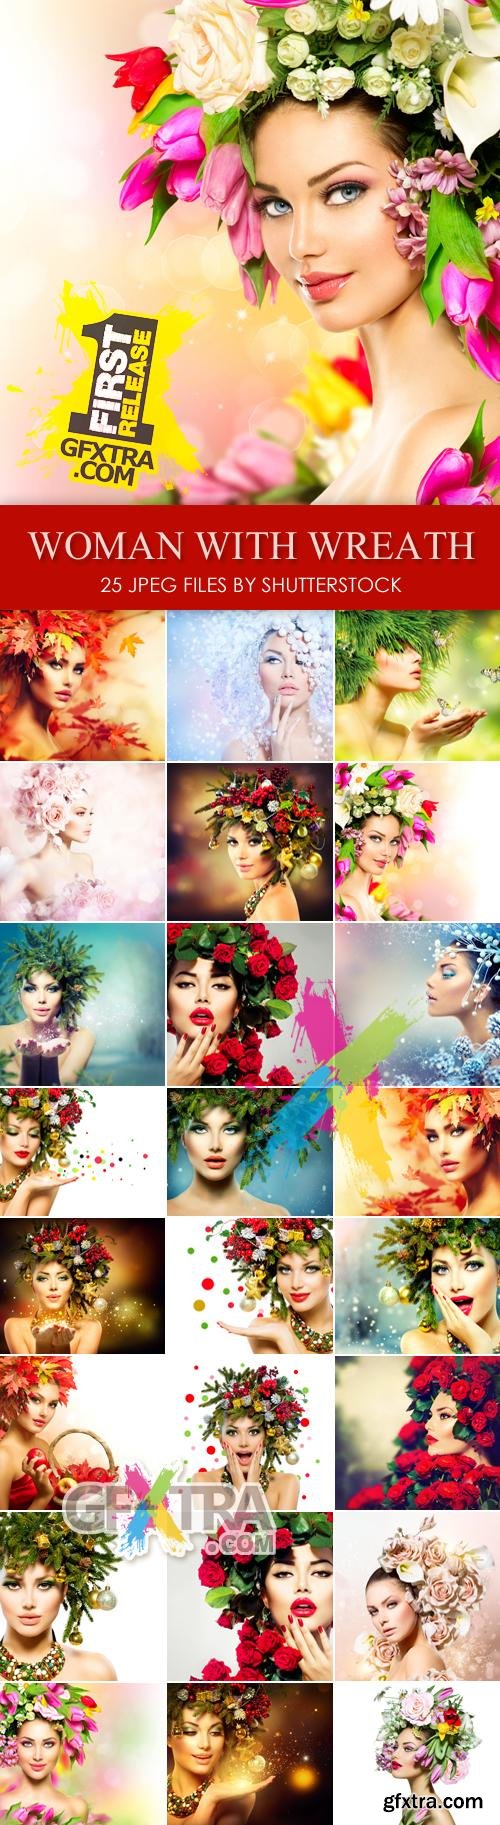 Stock Photo - Woman with Wreath on Her Head